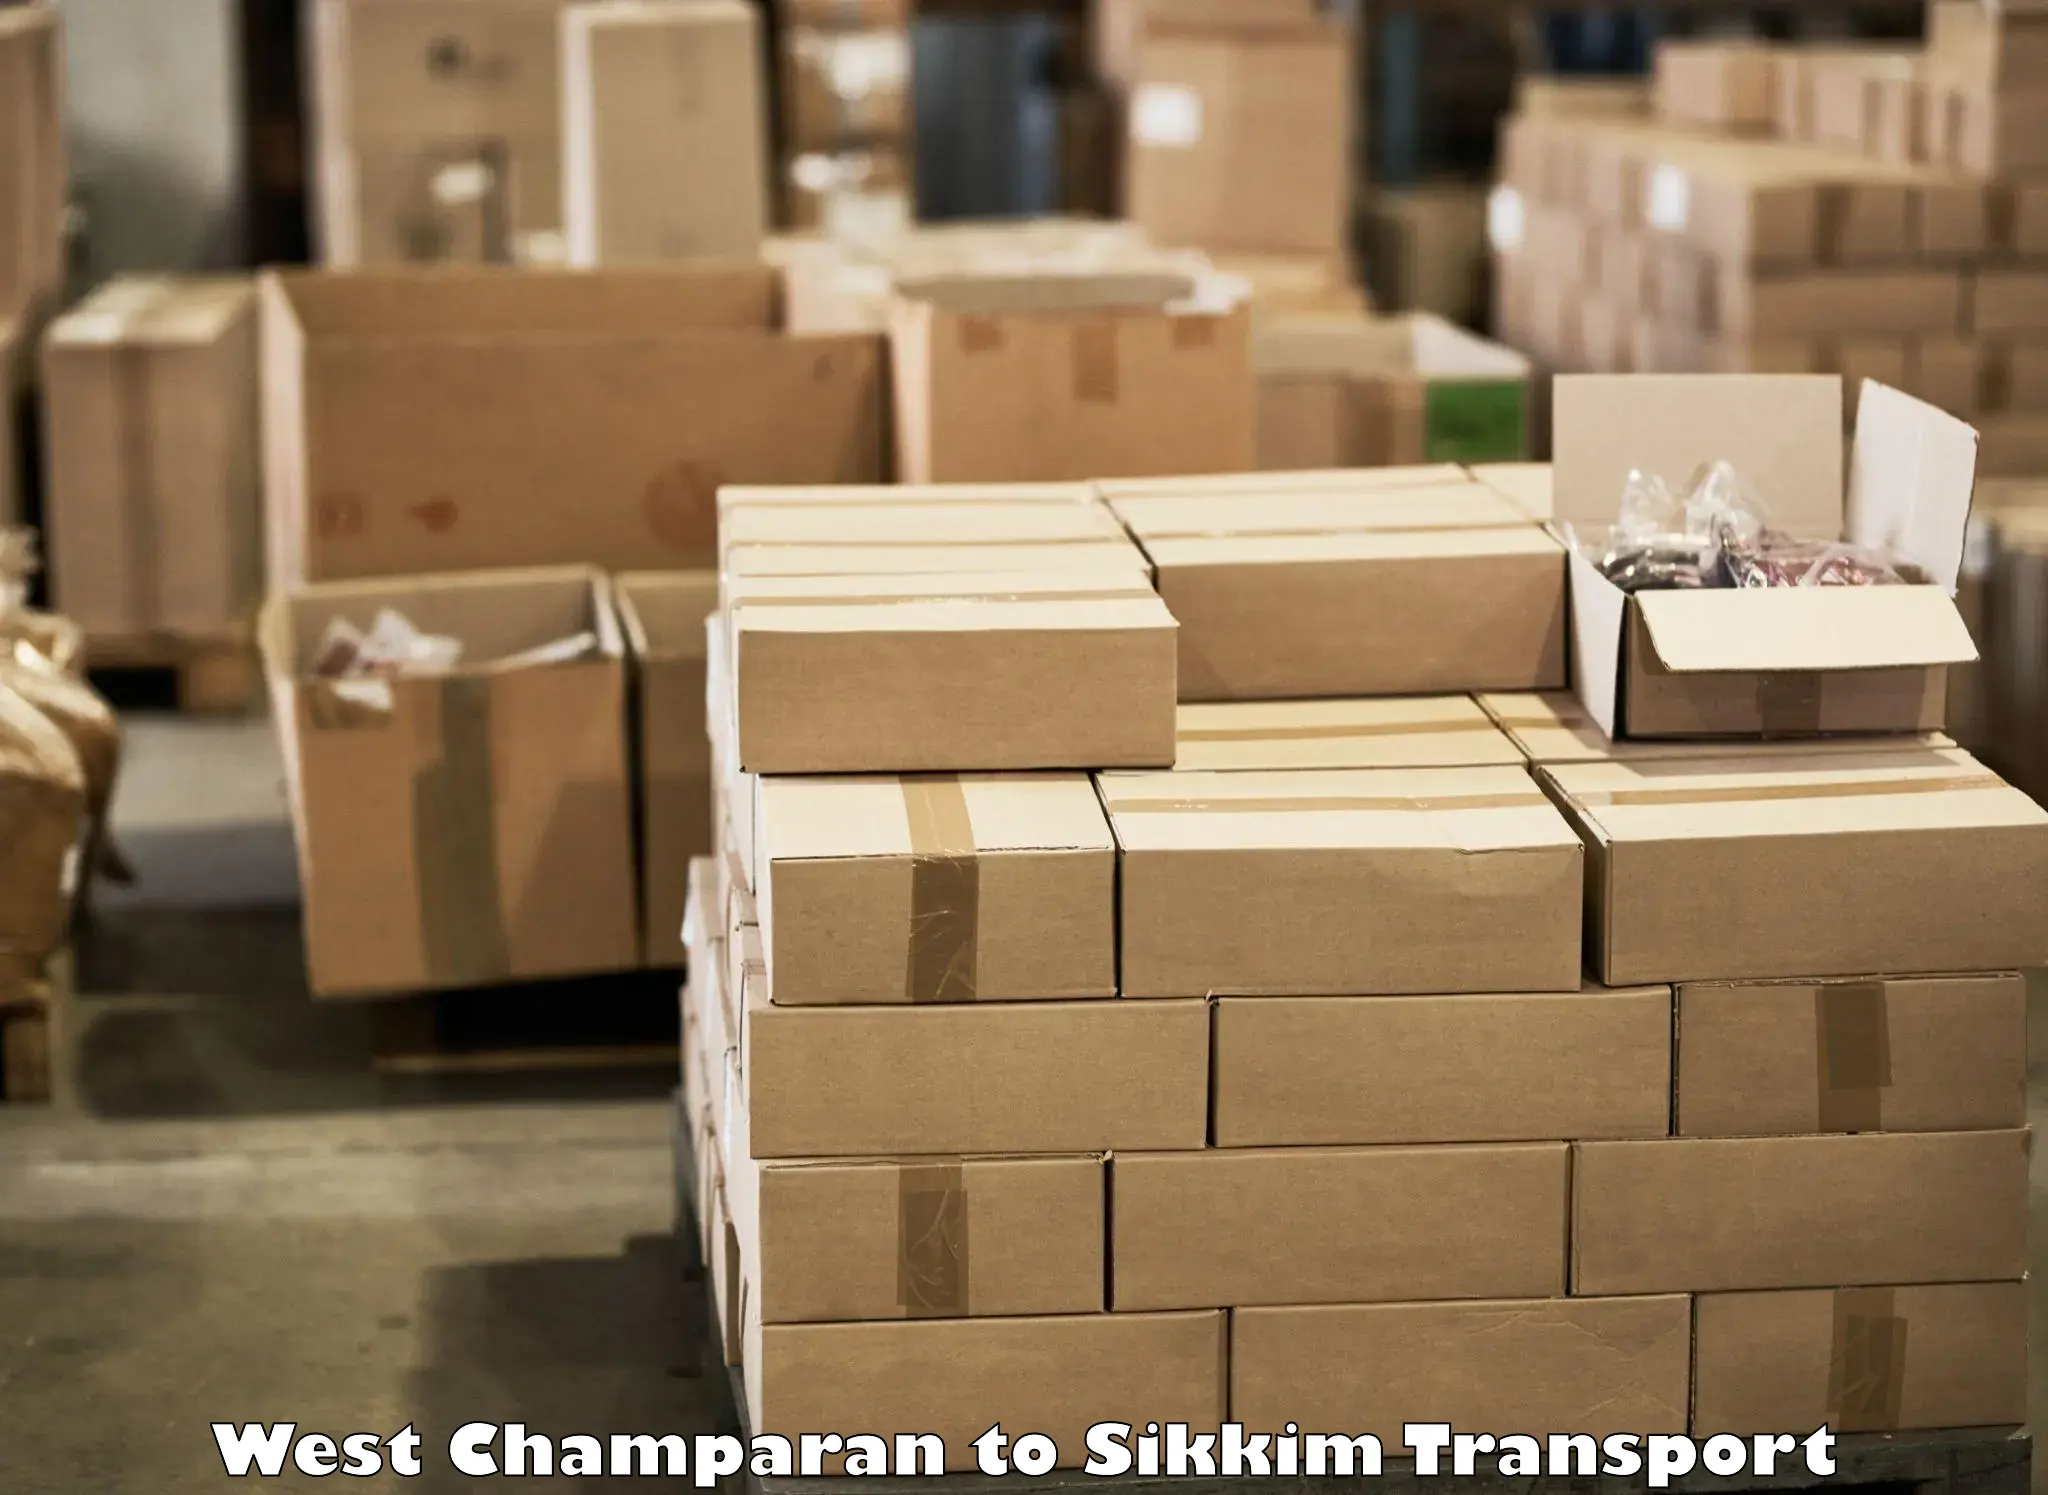 Daily parcel service transport West Champaran to Rangpo